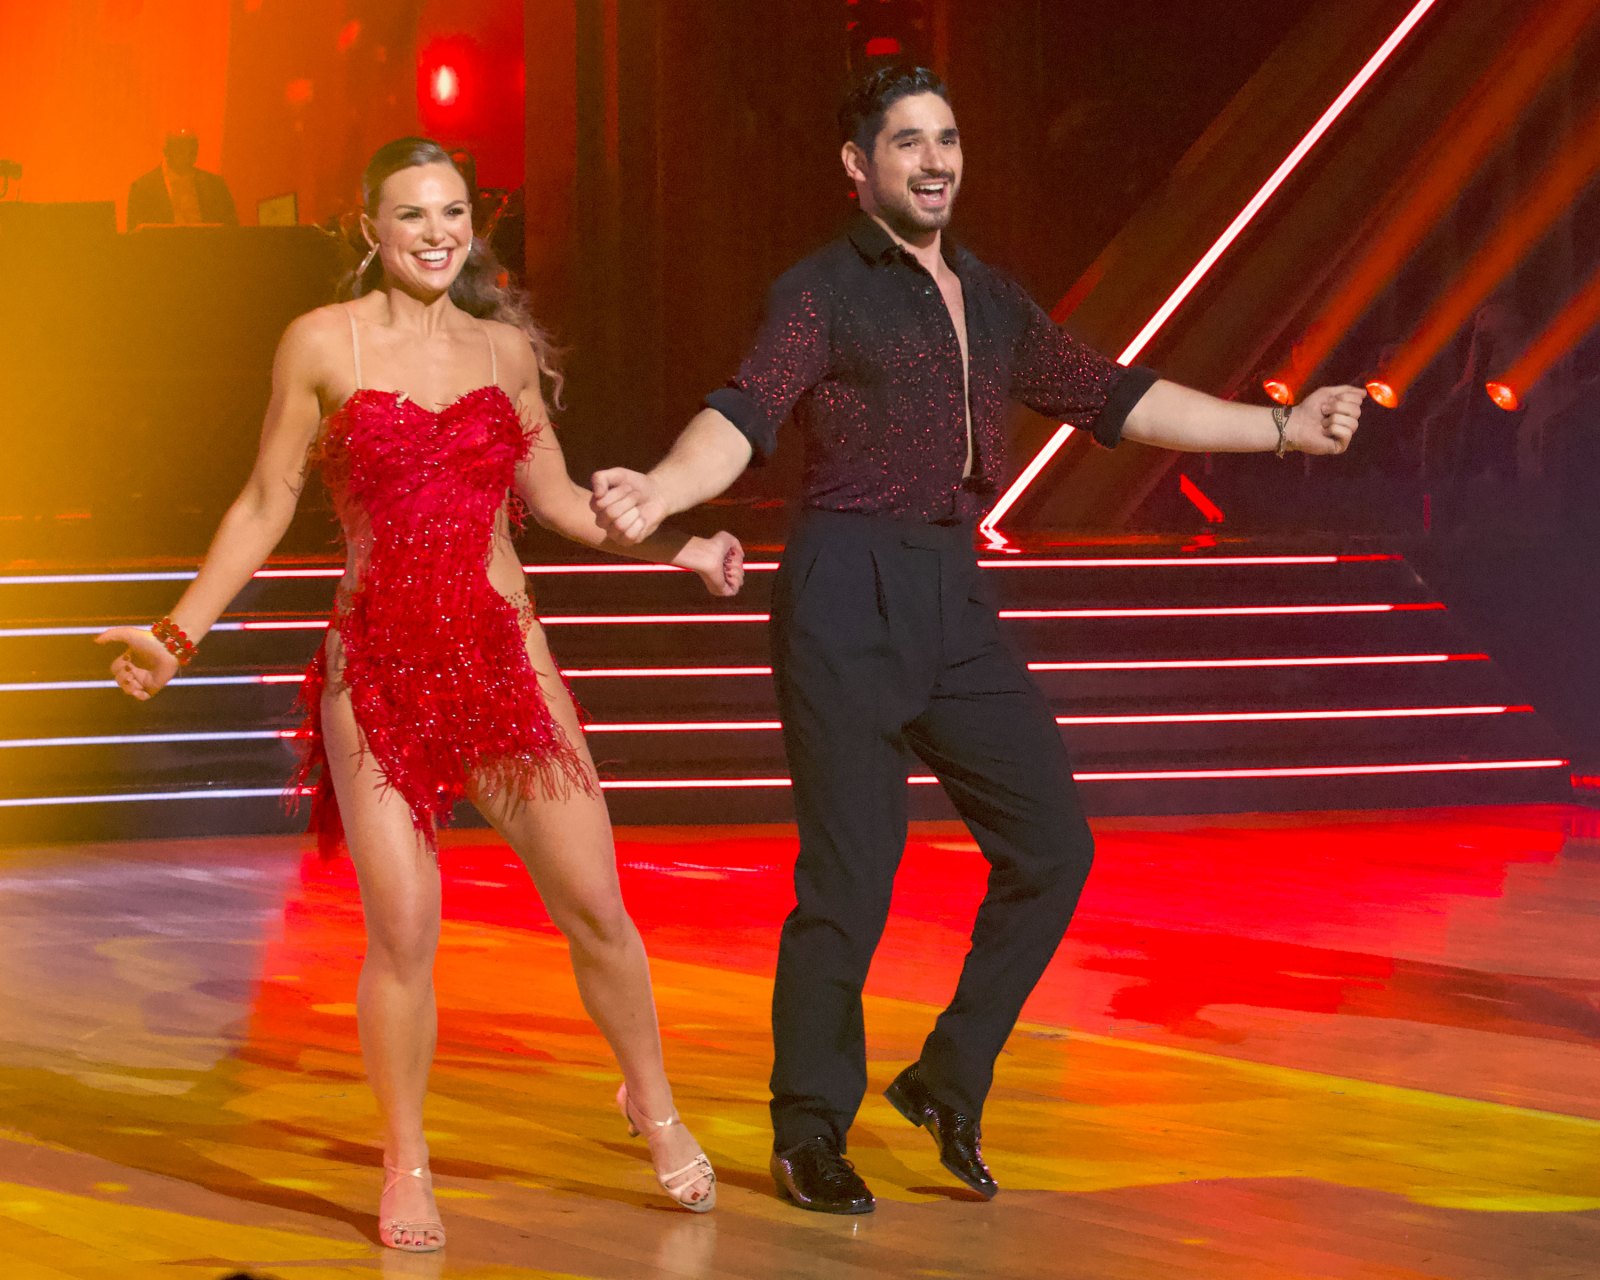 HANNAH BROWN, ALAN BERSTEN ‘Dancing With the Stars’ Judges Hand Out 2 Perfect Scores — Then Admit They’re ‘Irritated’ by Results